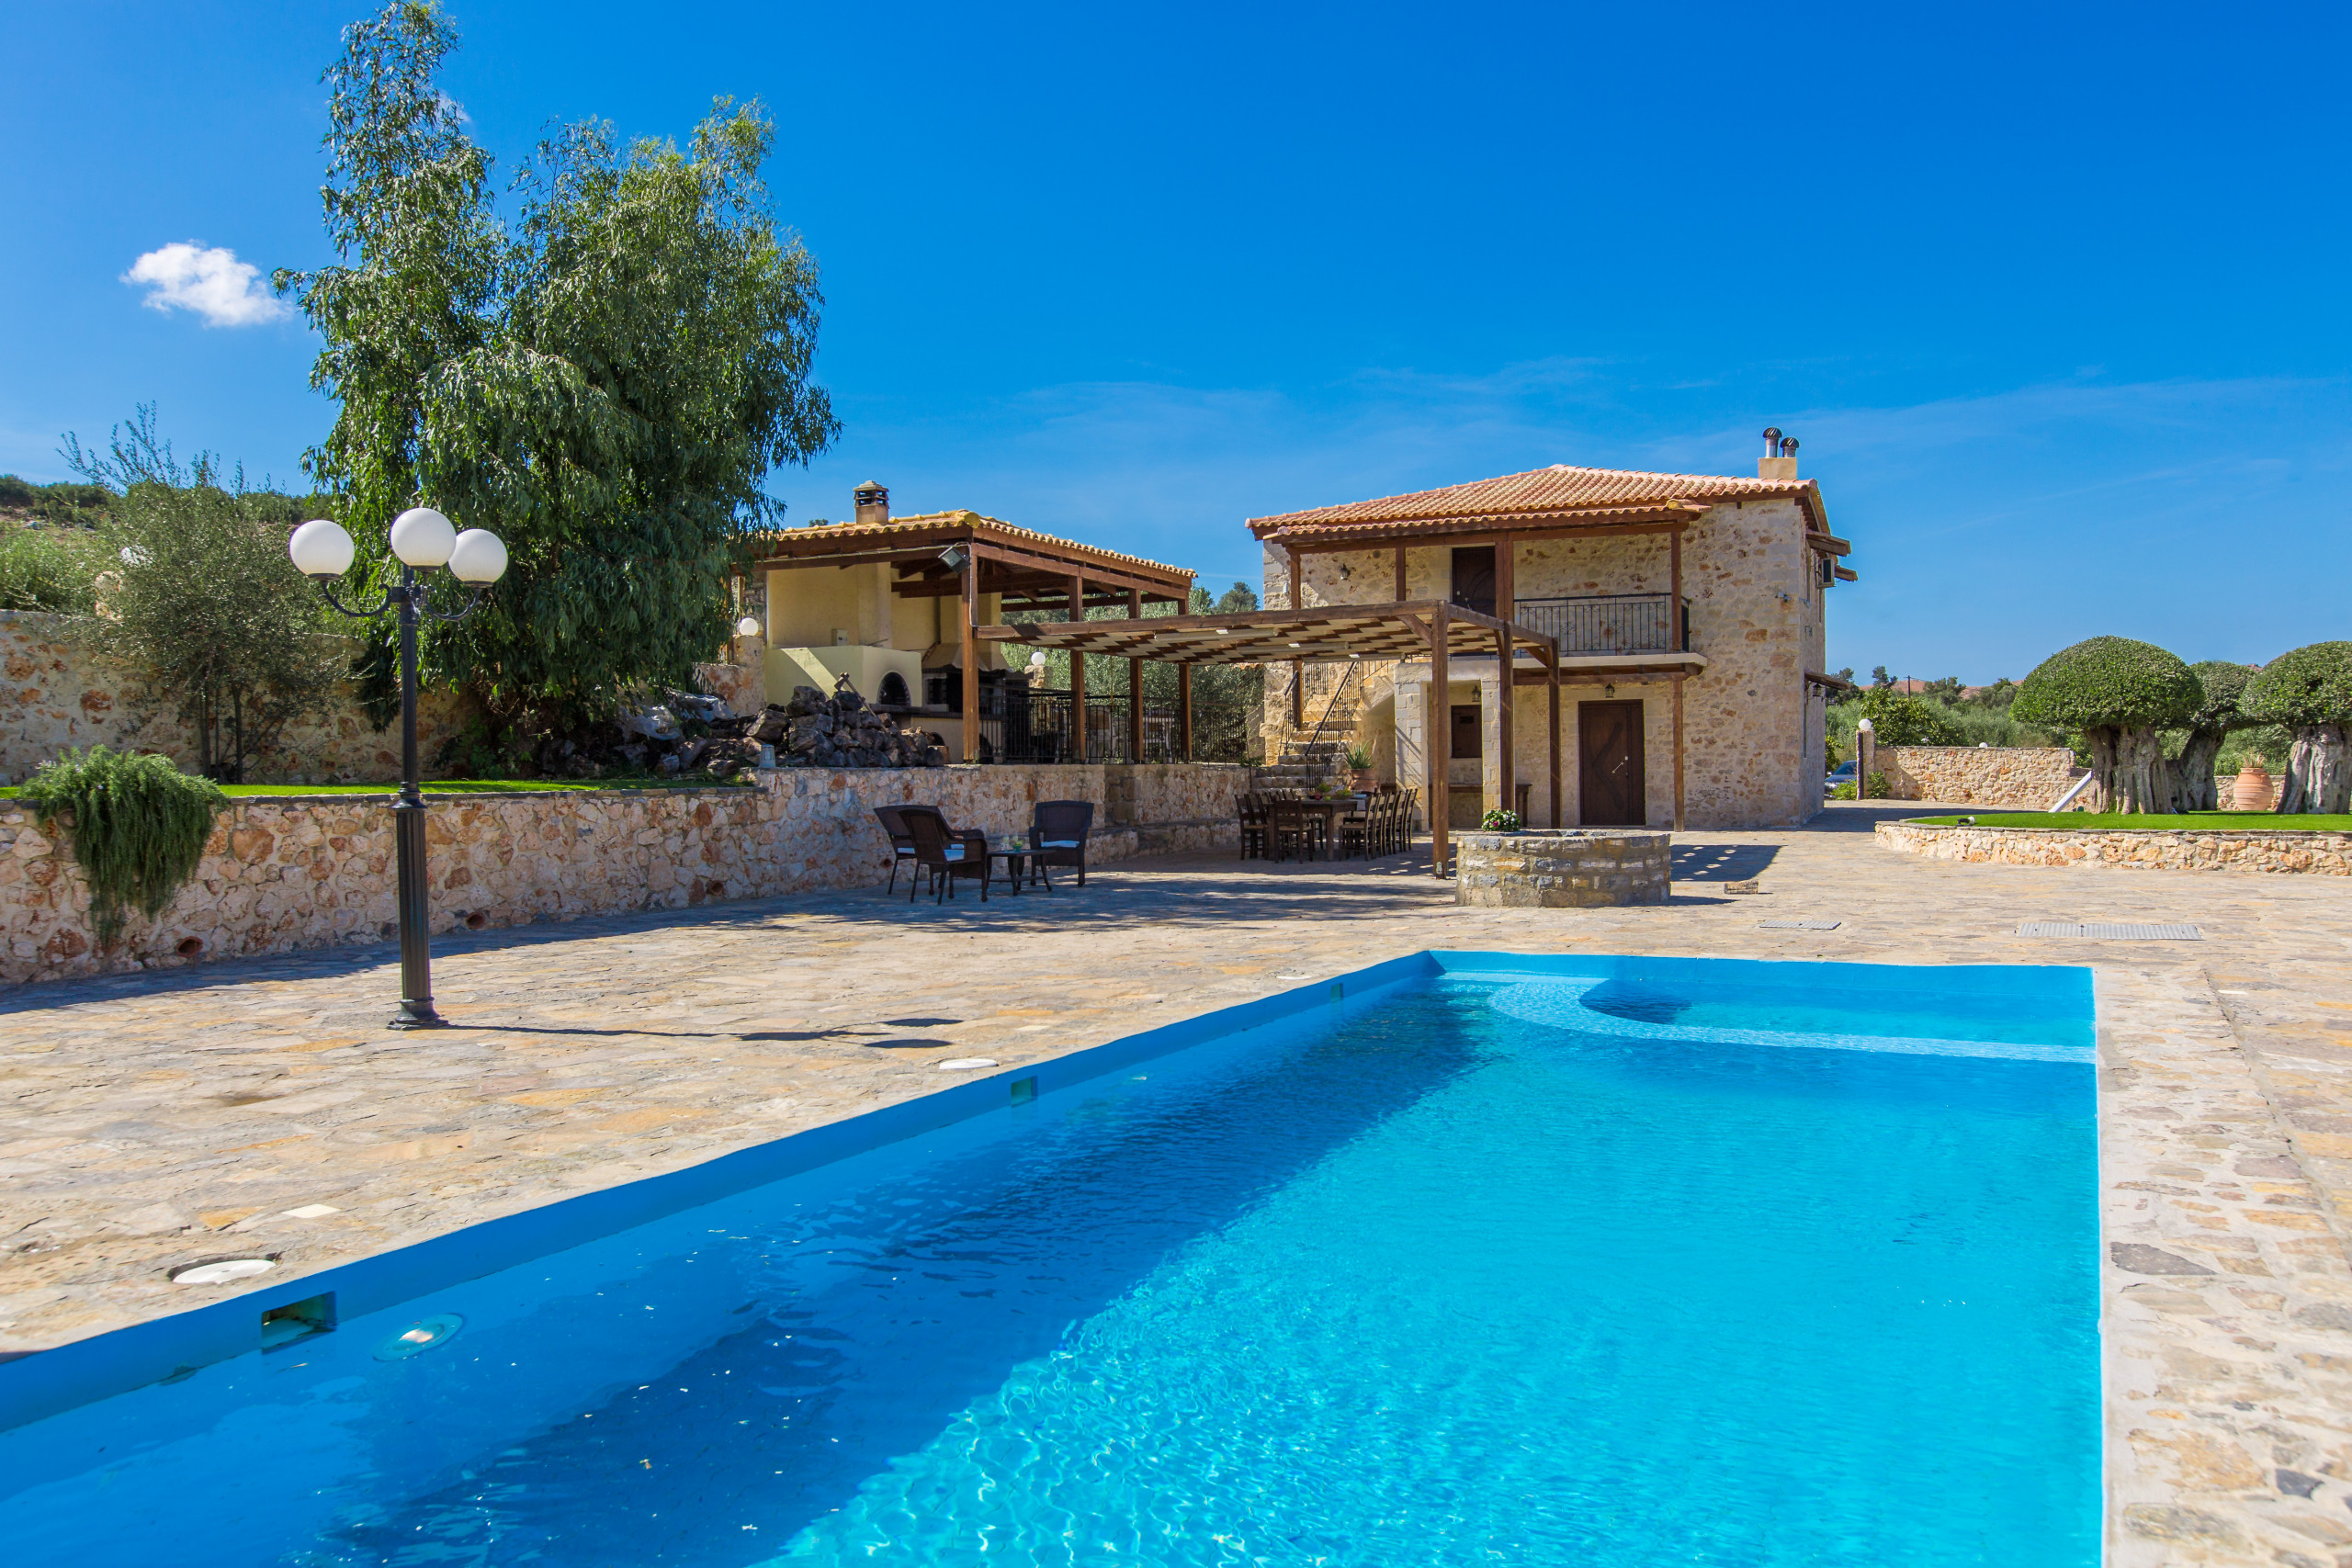 Nestor Villa, with Private Pool & Absolute Privacy